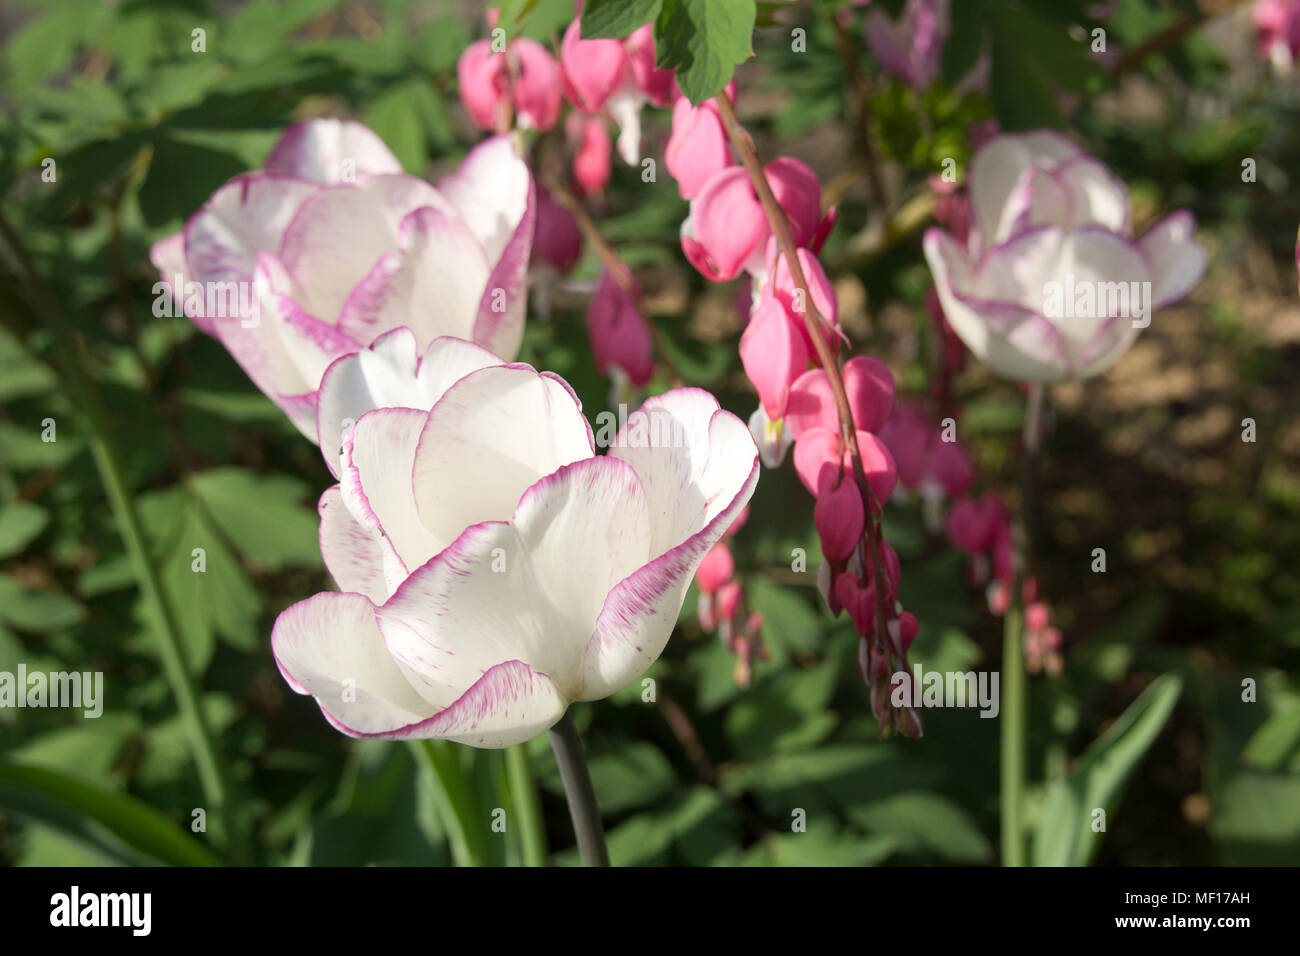 Purple and white tulips in the garden with bleeding hearts in the background Stock Photo